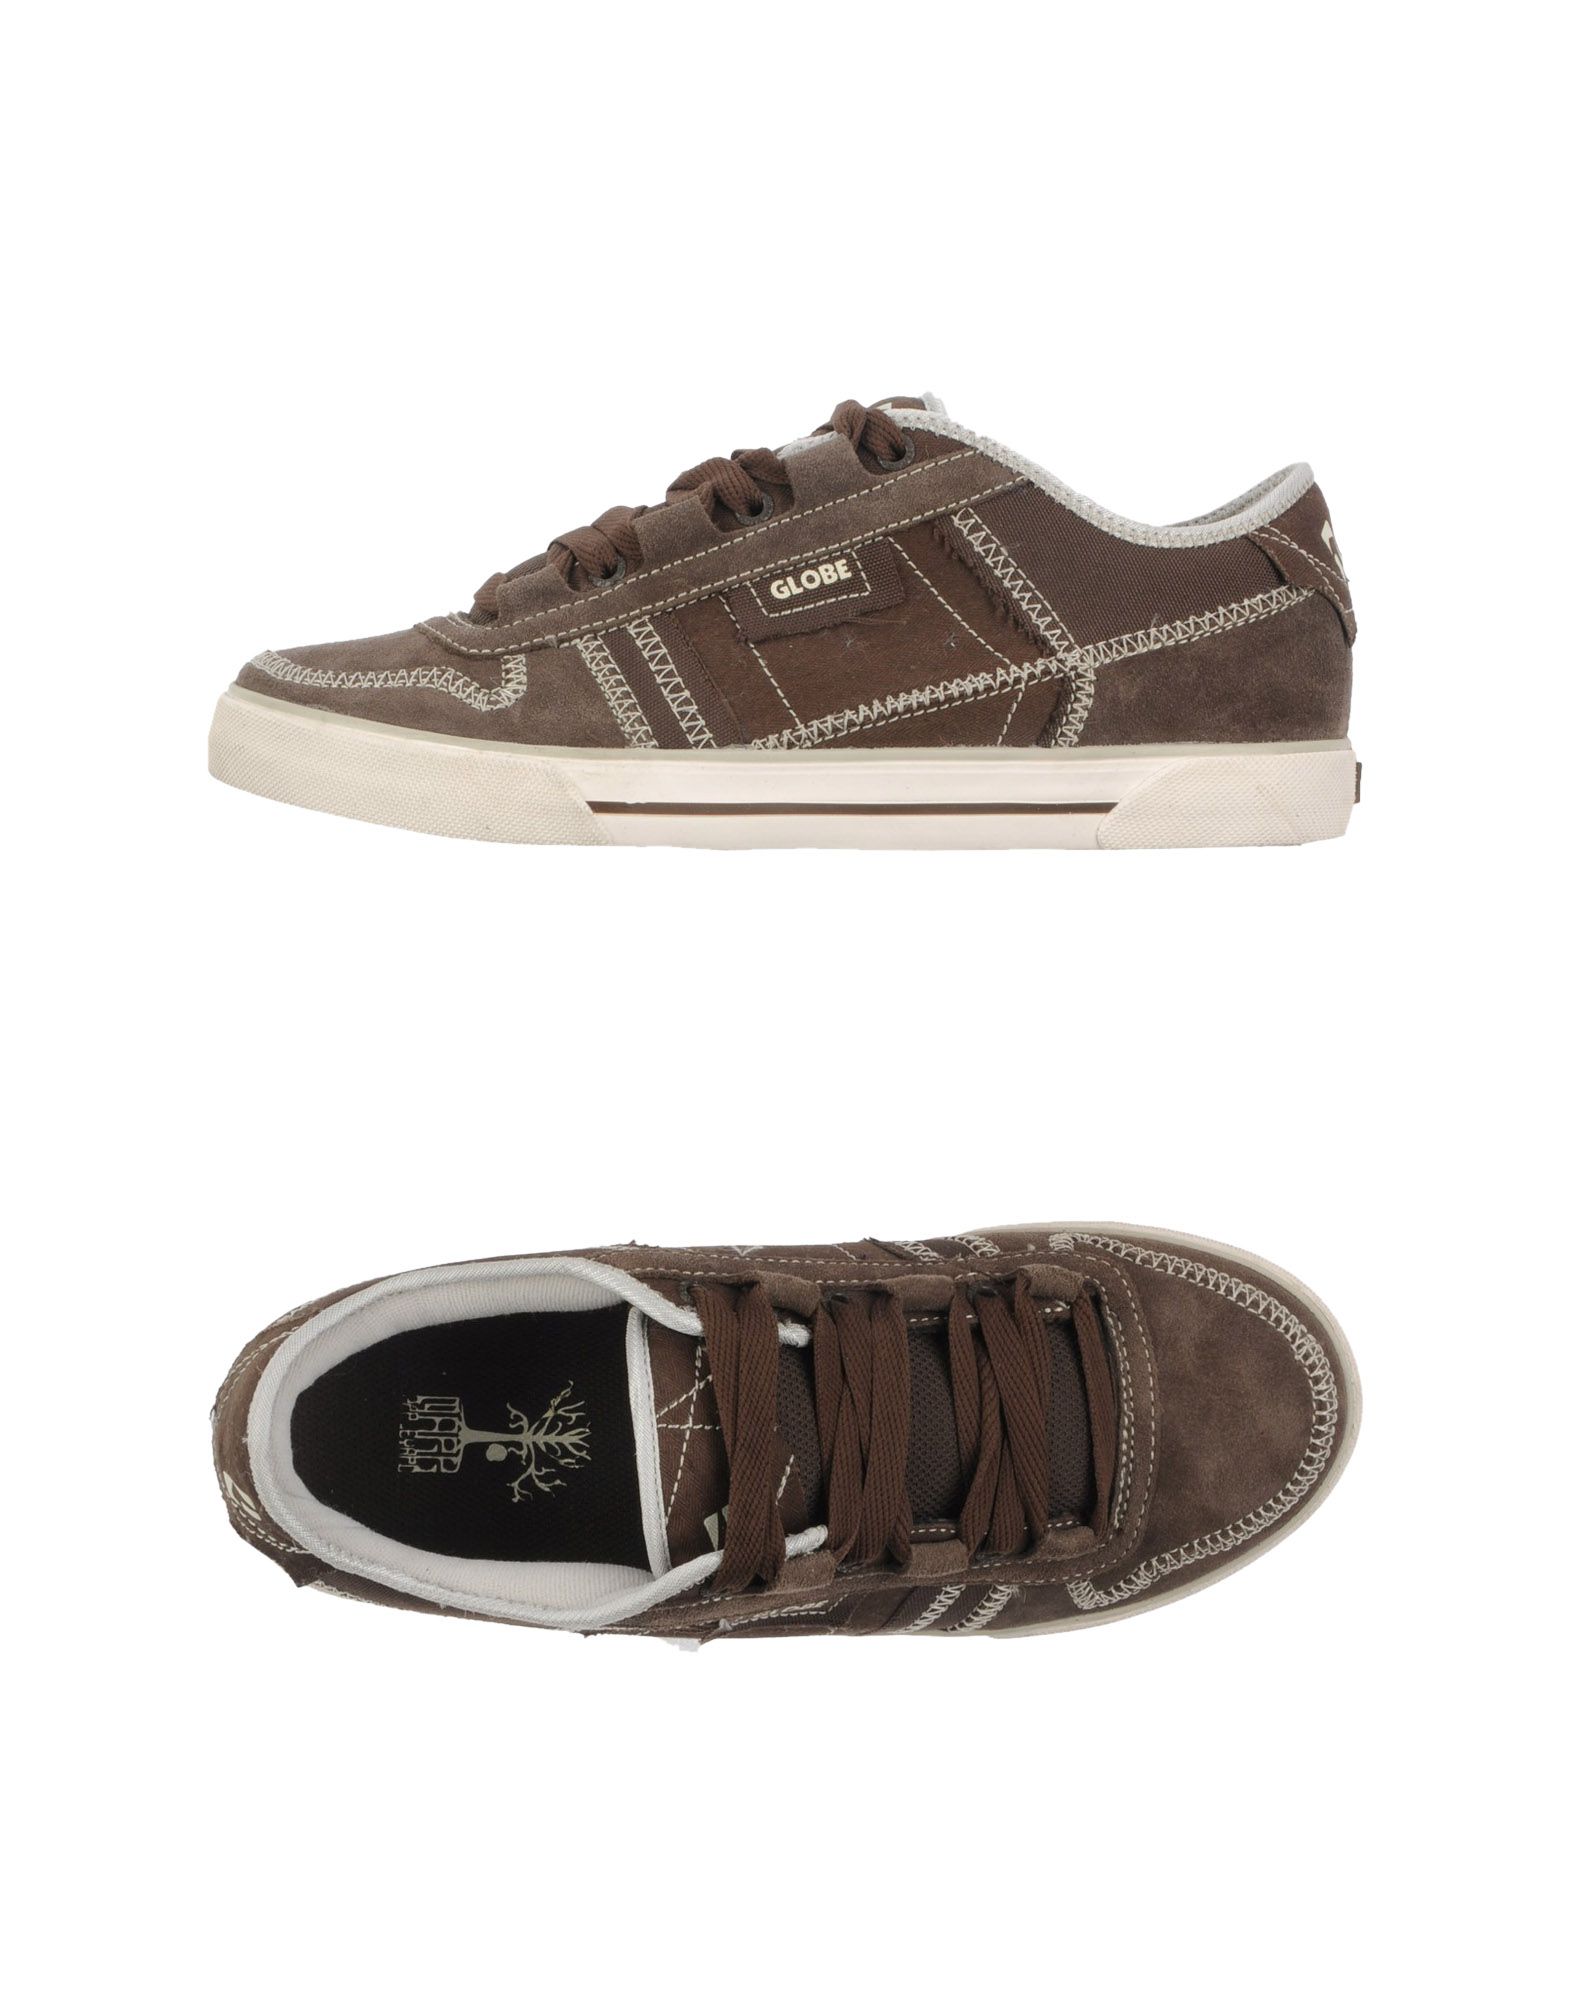 Foto Globe Sneakers Hombre Cacao